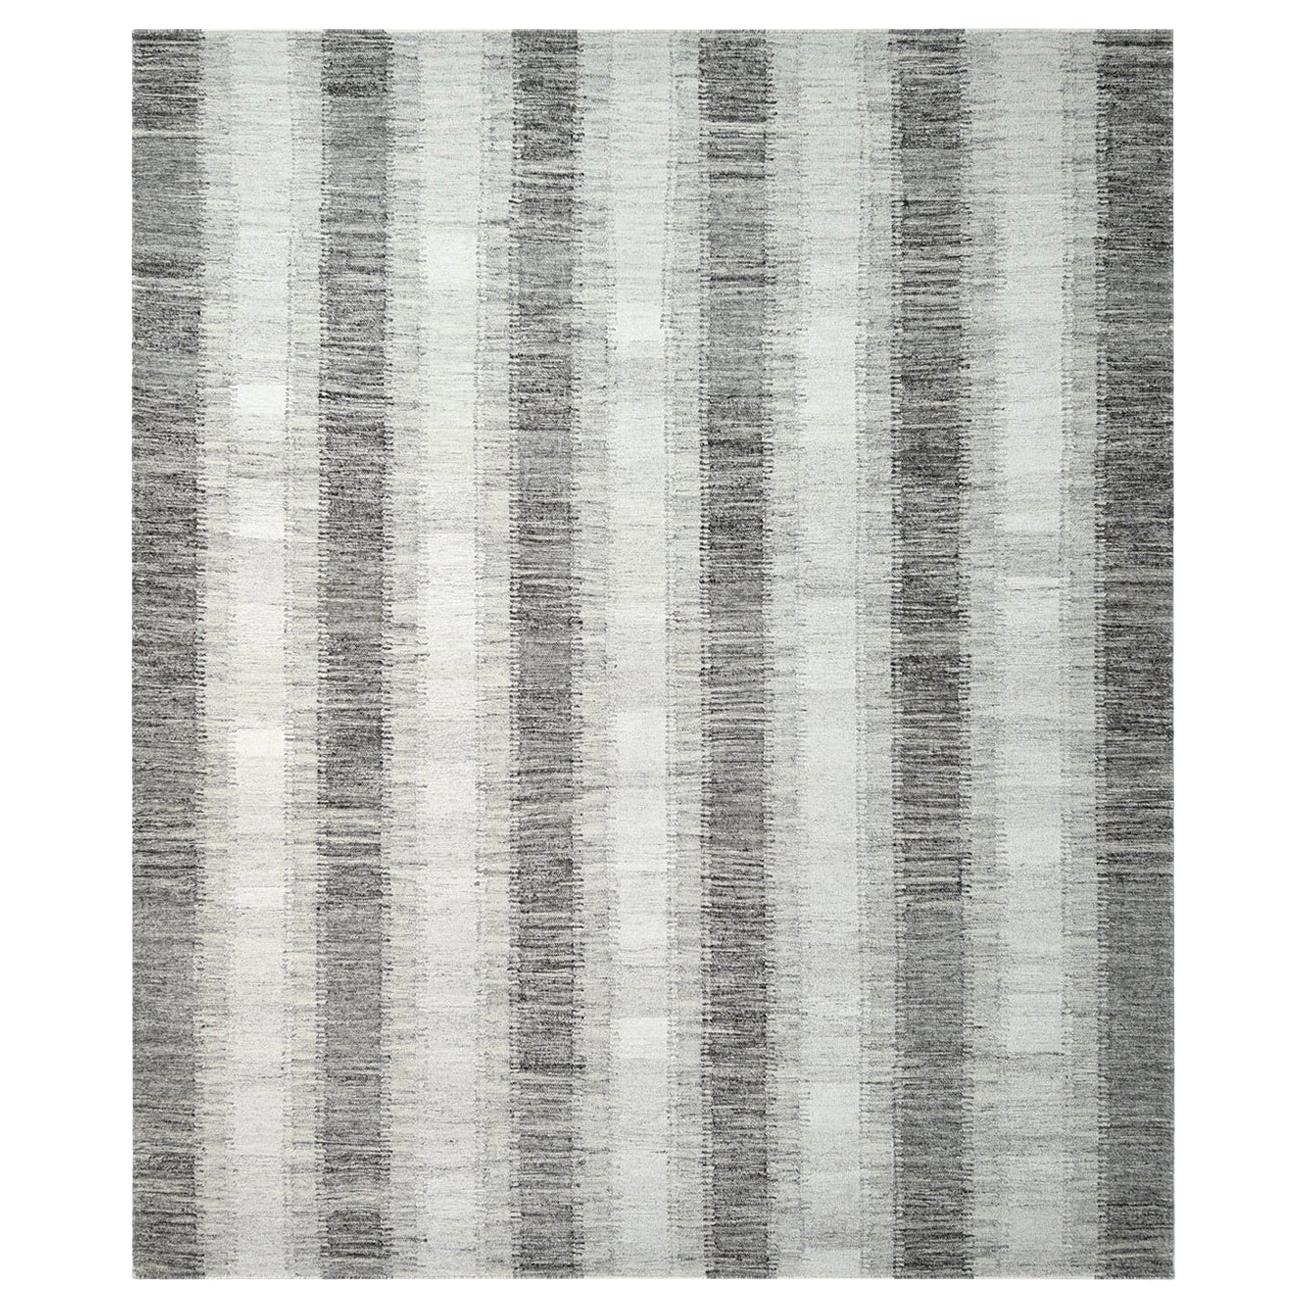 Indian Made Hand Woven Contemporary Flatweave Area Rug For Sale